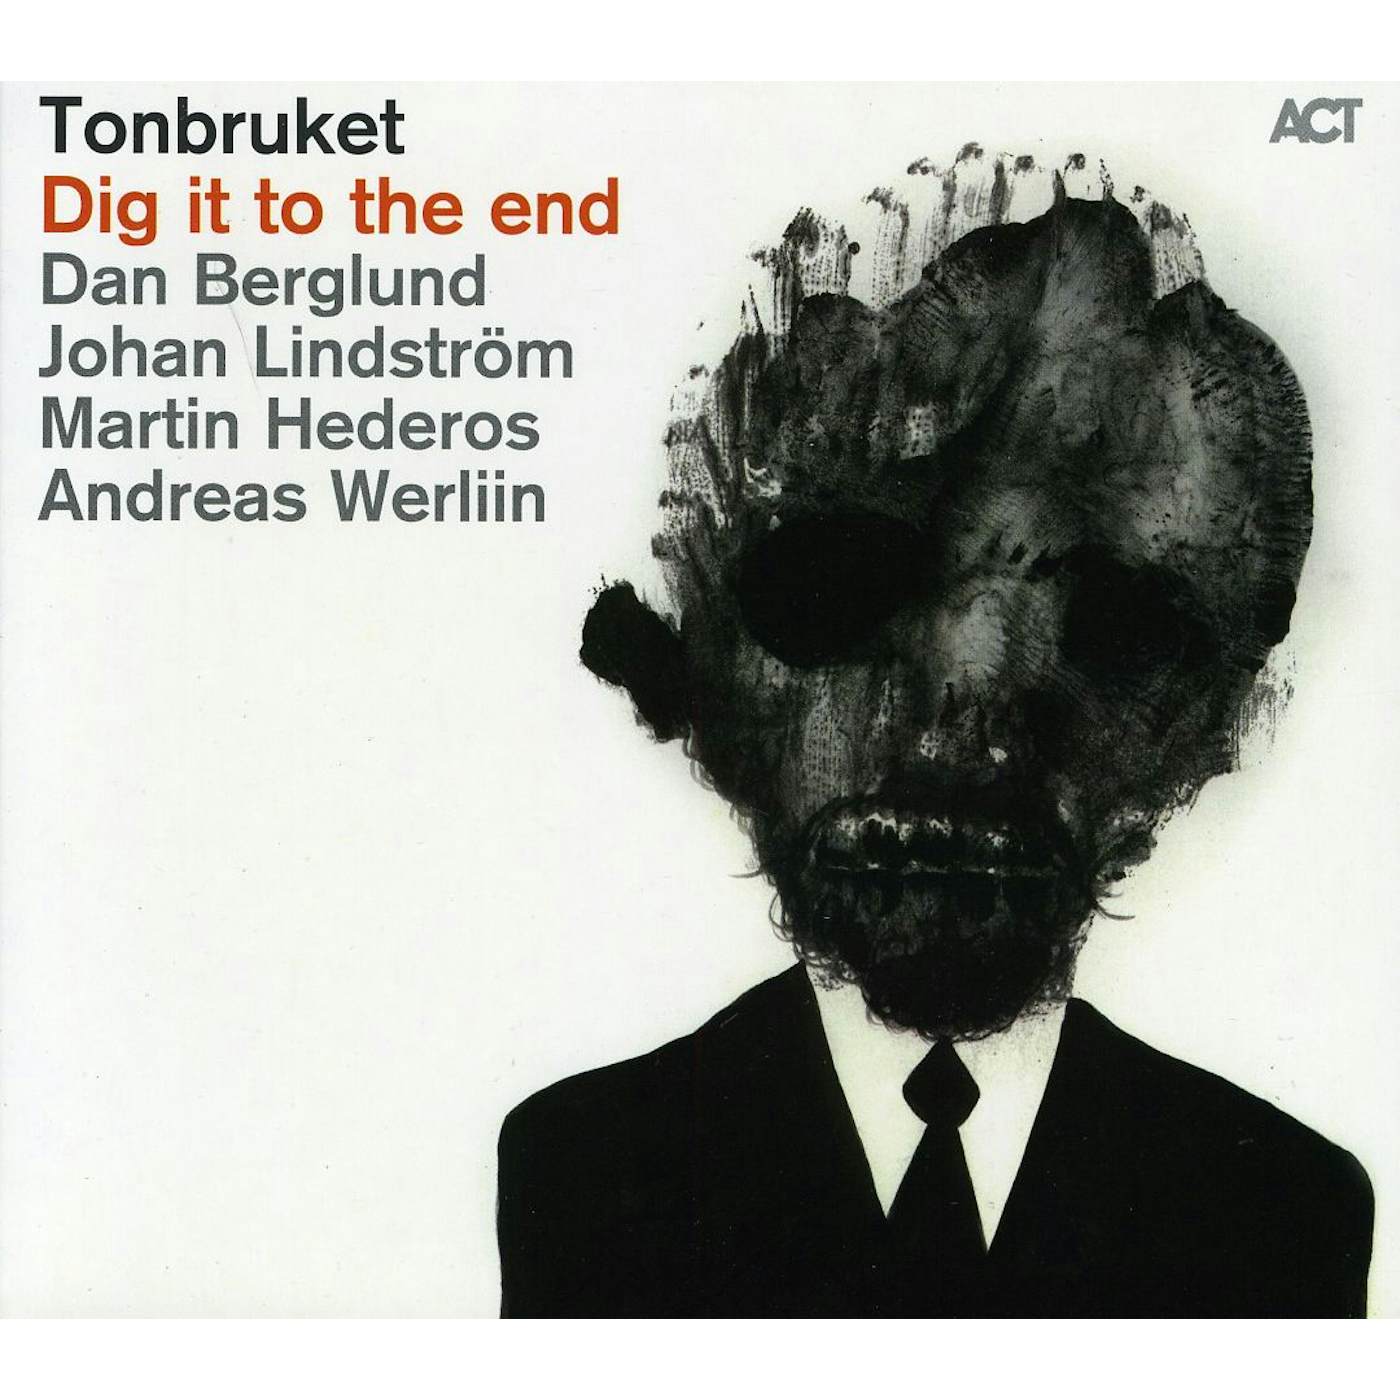 Tonbruket DIG IT TO THE END CD